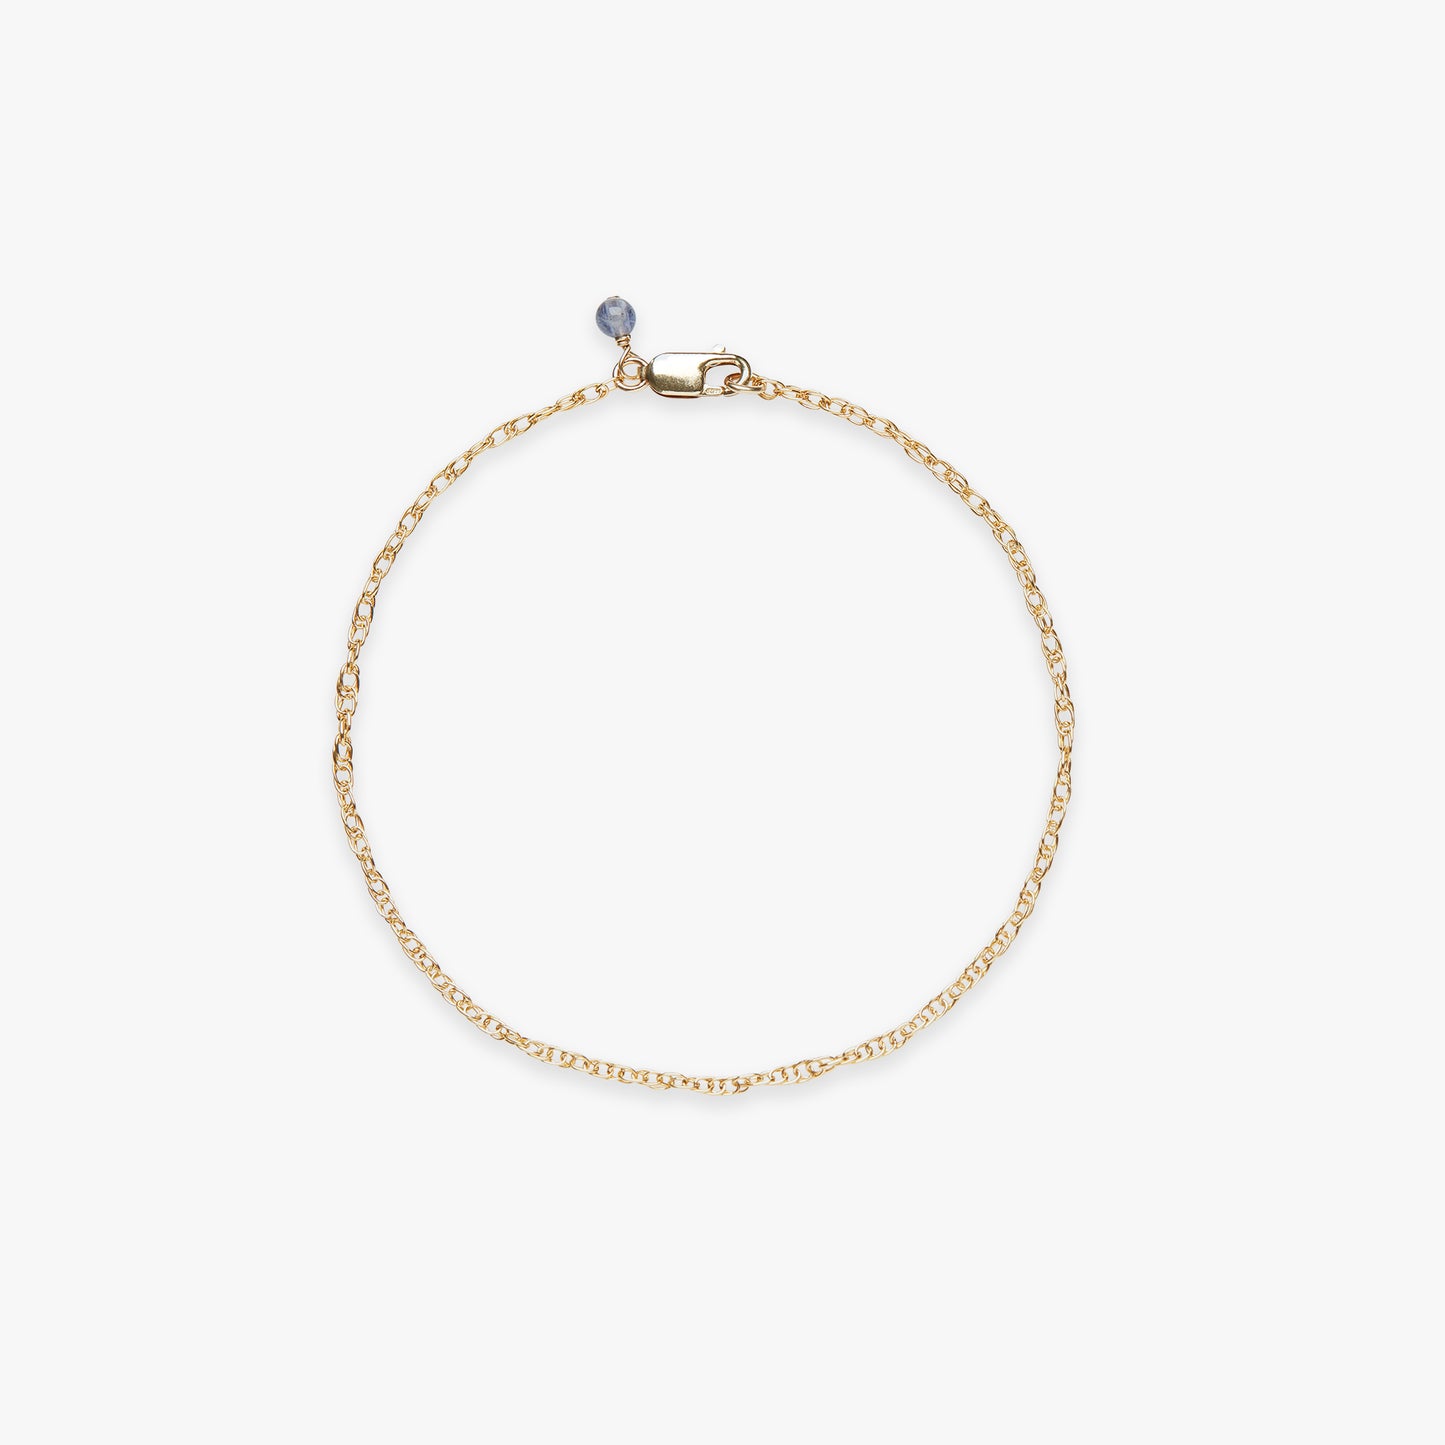 Twist chain armband gold filled